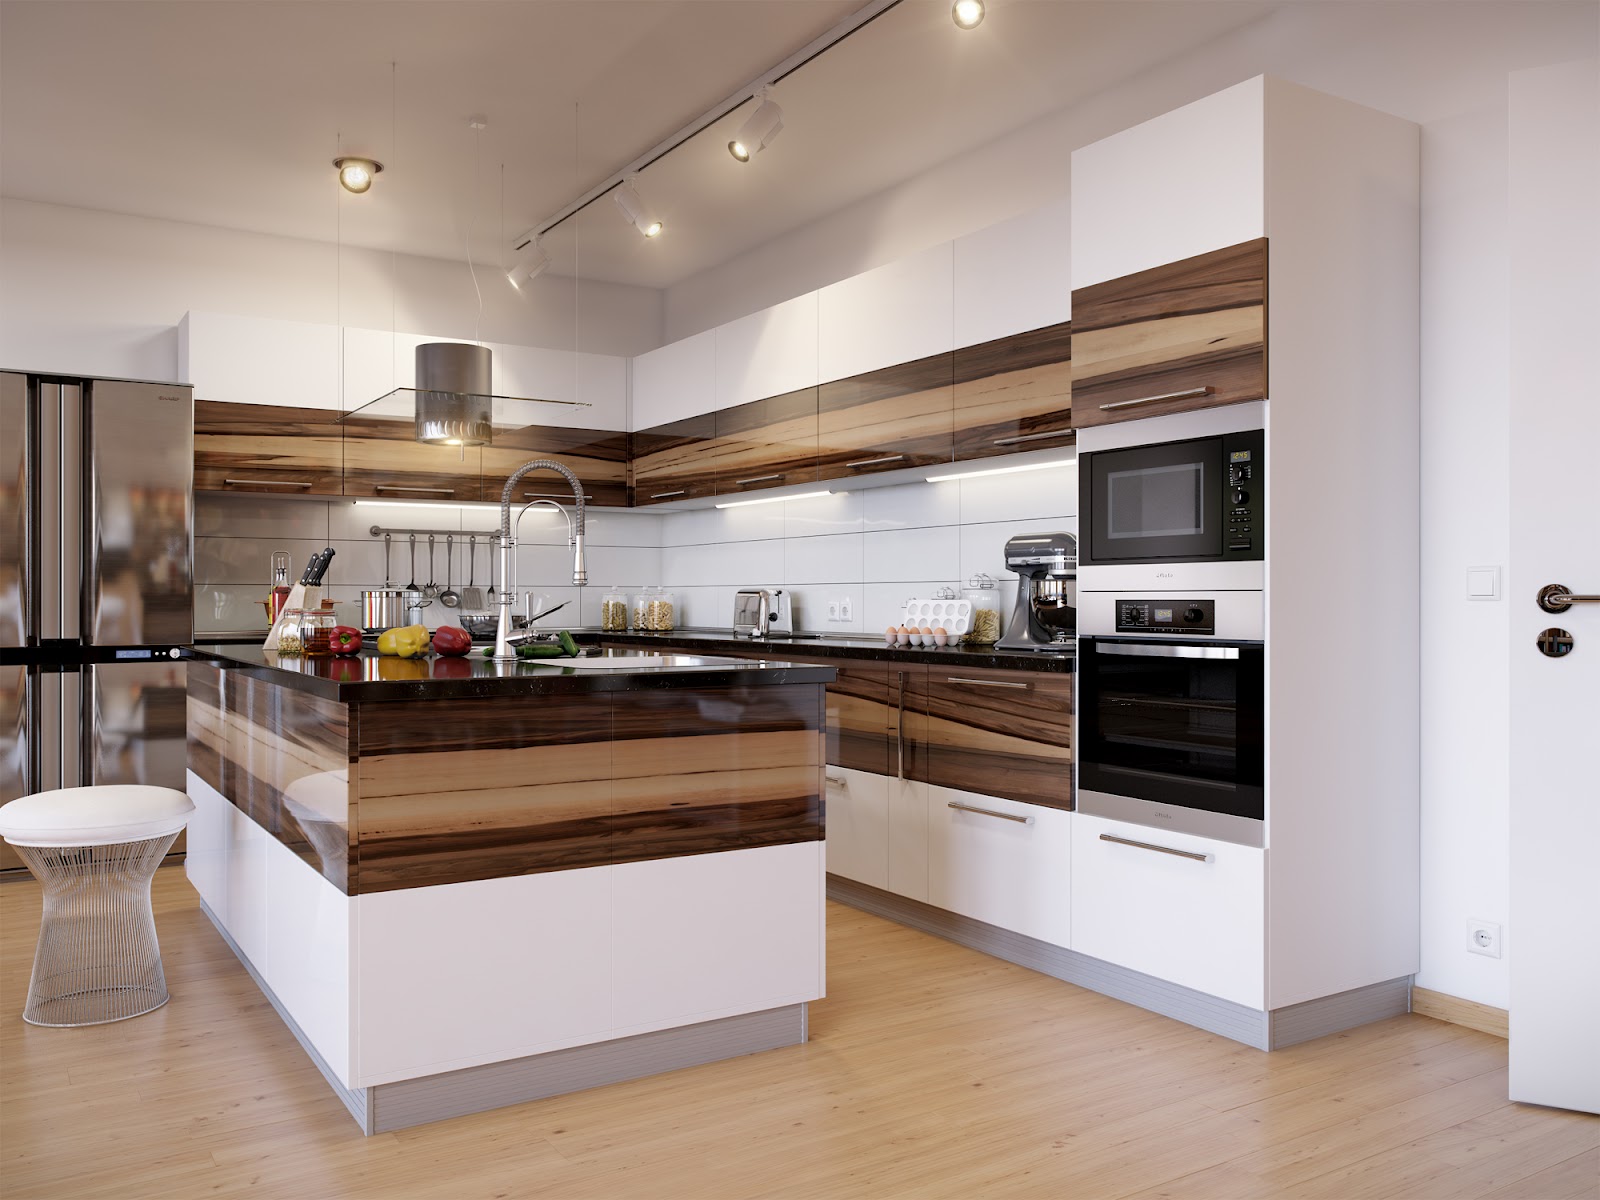 35 Kitchen Design For Your Home – The WoW Style